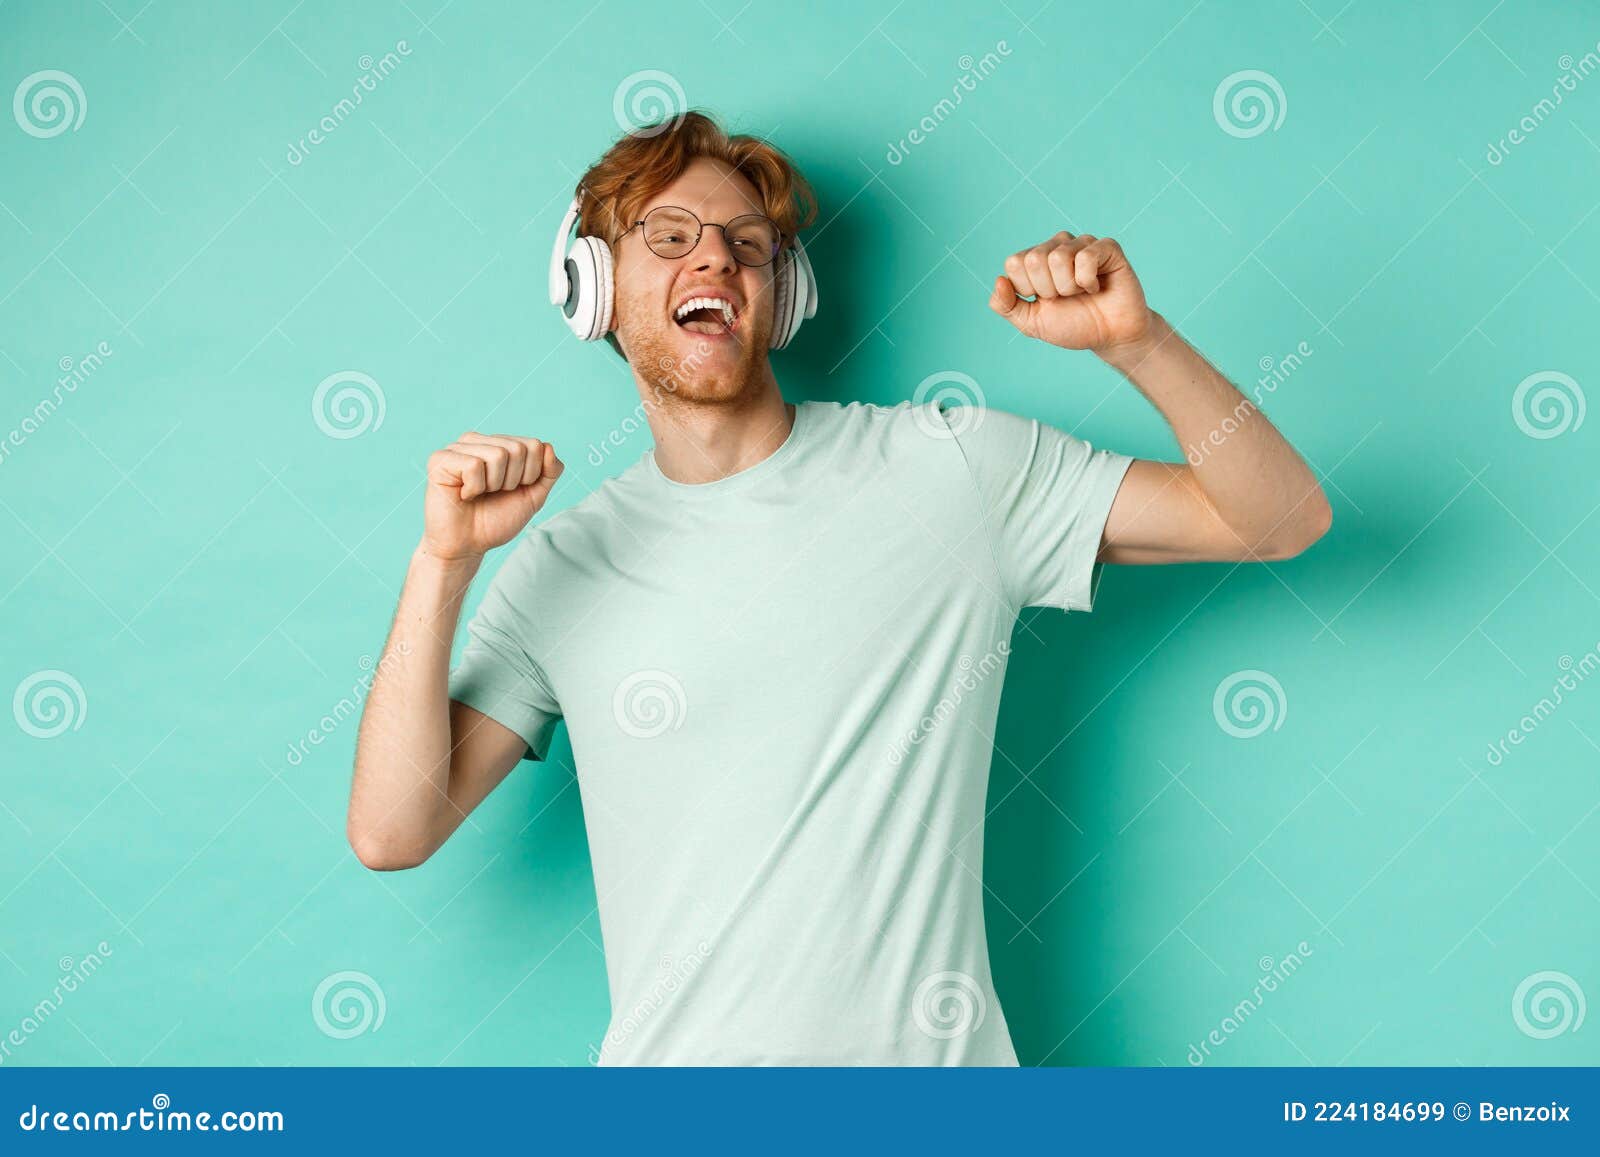 Lifestyle Concept. Carefree Guy with Red Hair, Dancing and Having Fun,  Listening Music in Headphones, Standing Over Stock Image - Image of  shopping, lifestyle: 224184699